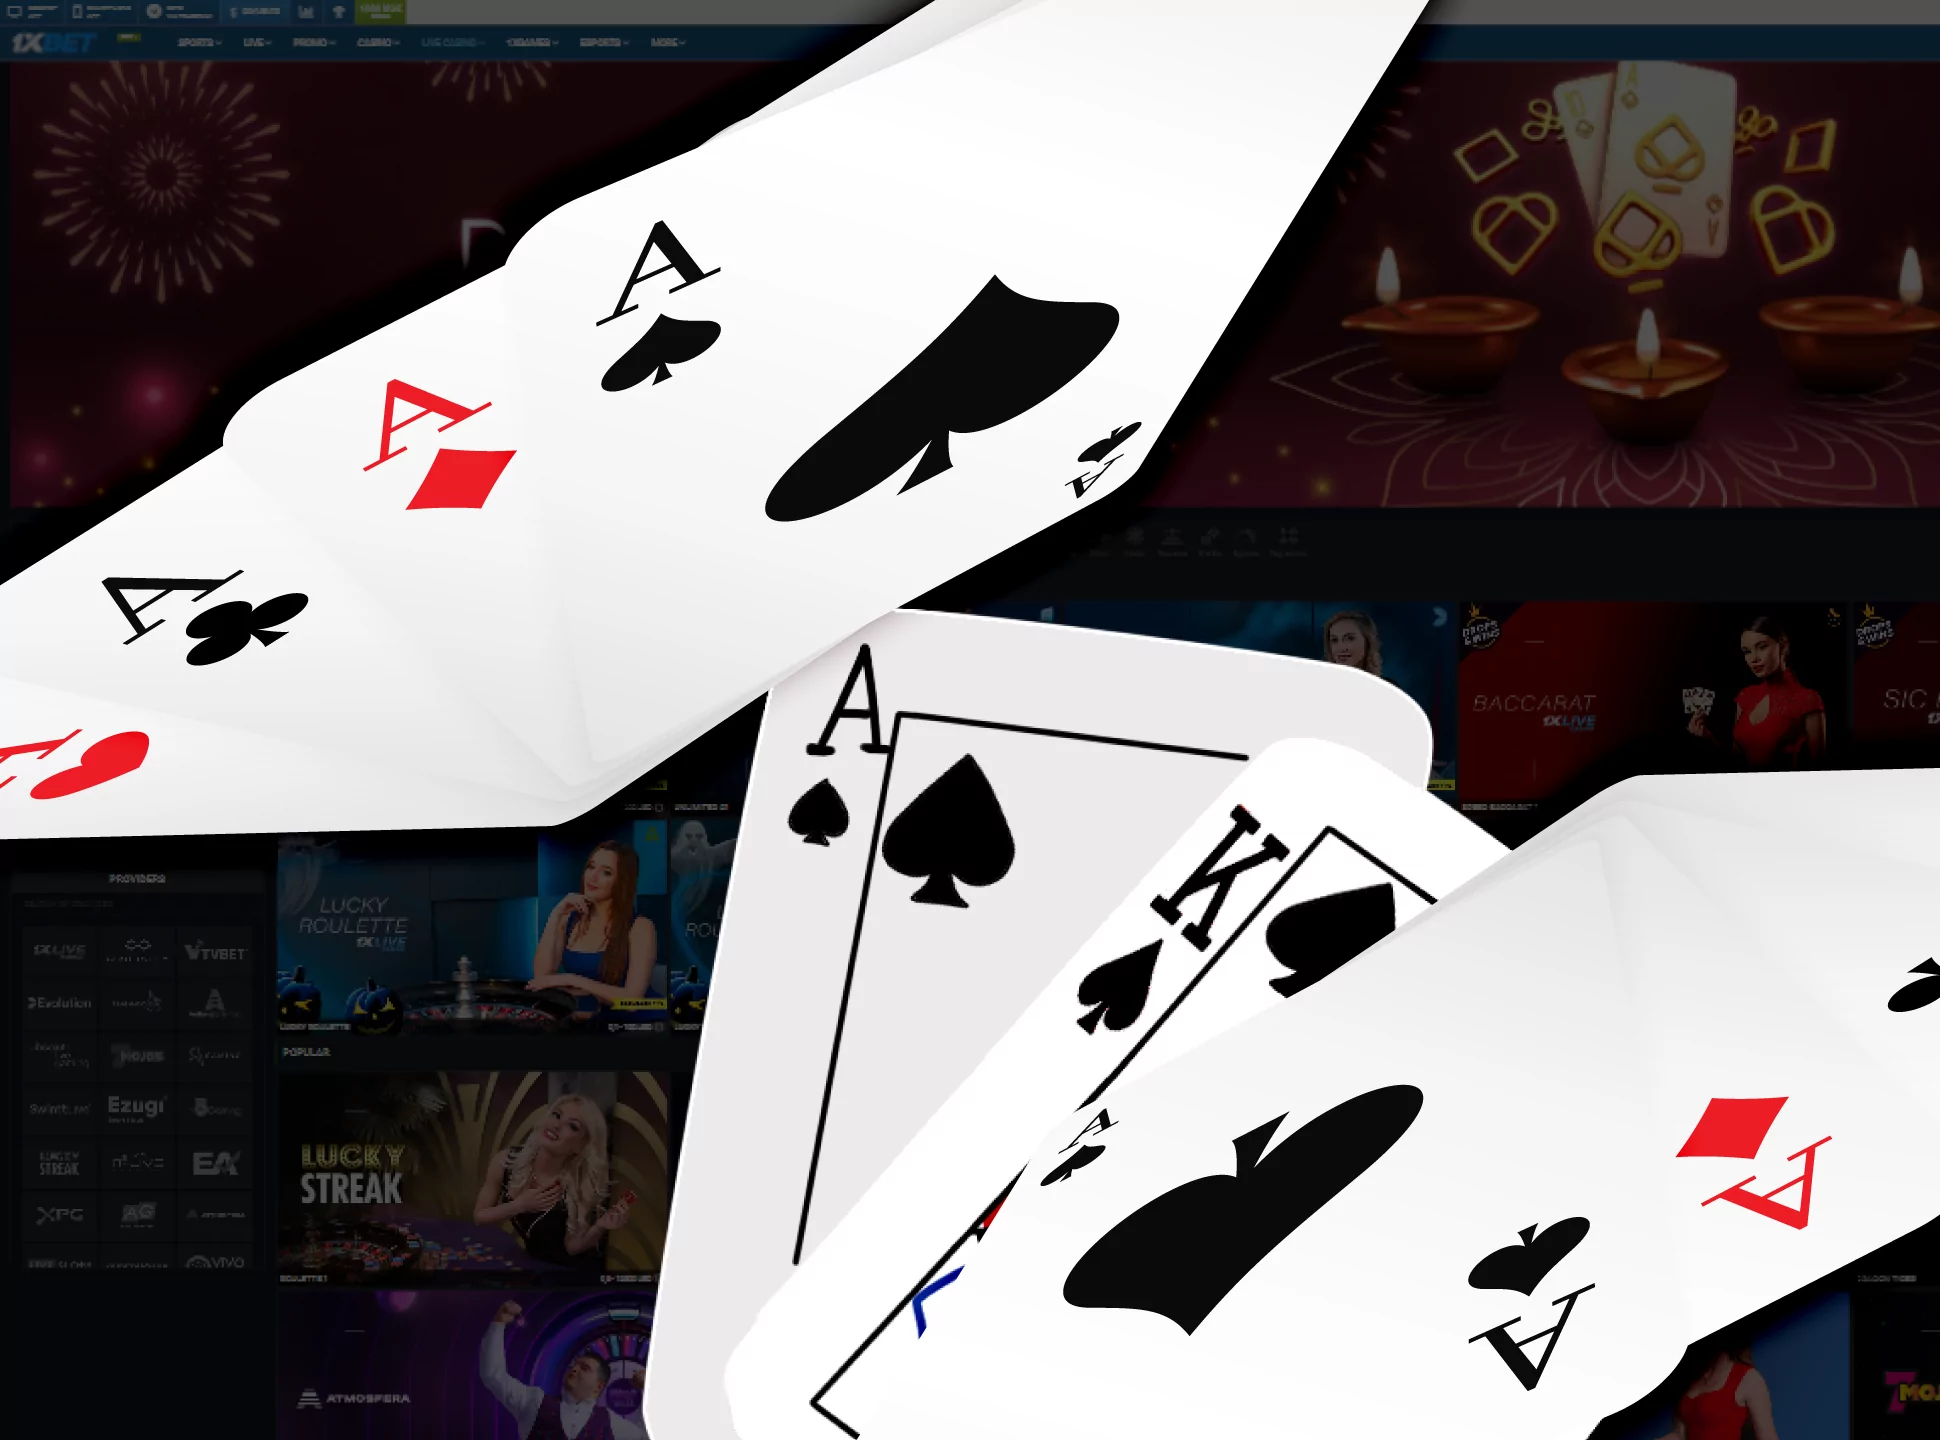 Play live blackjack in an online casino and win real money.